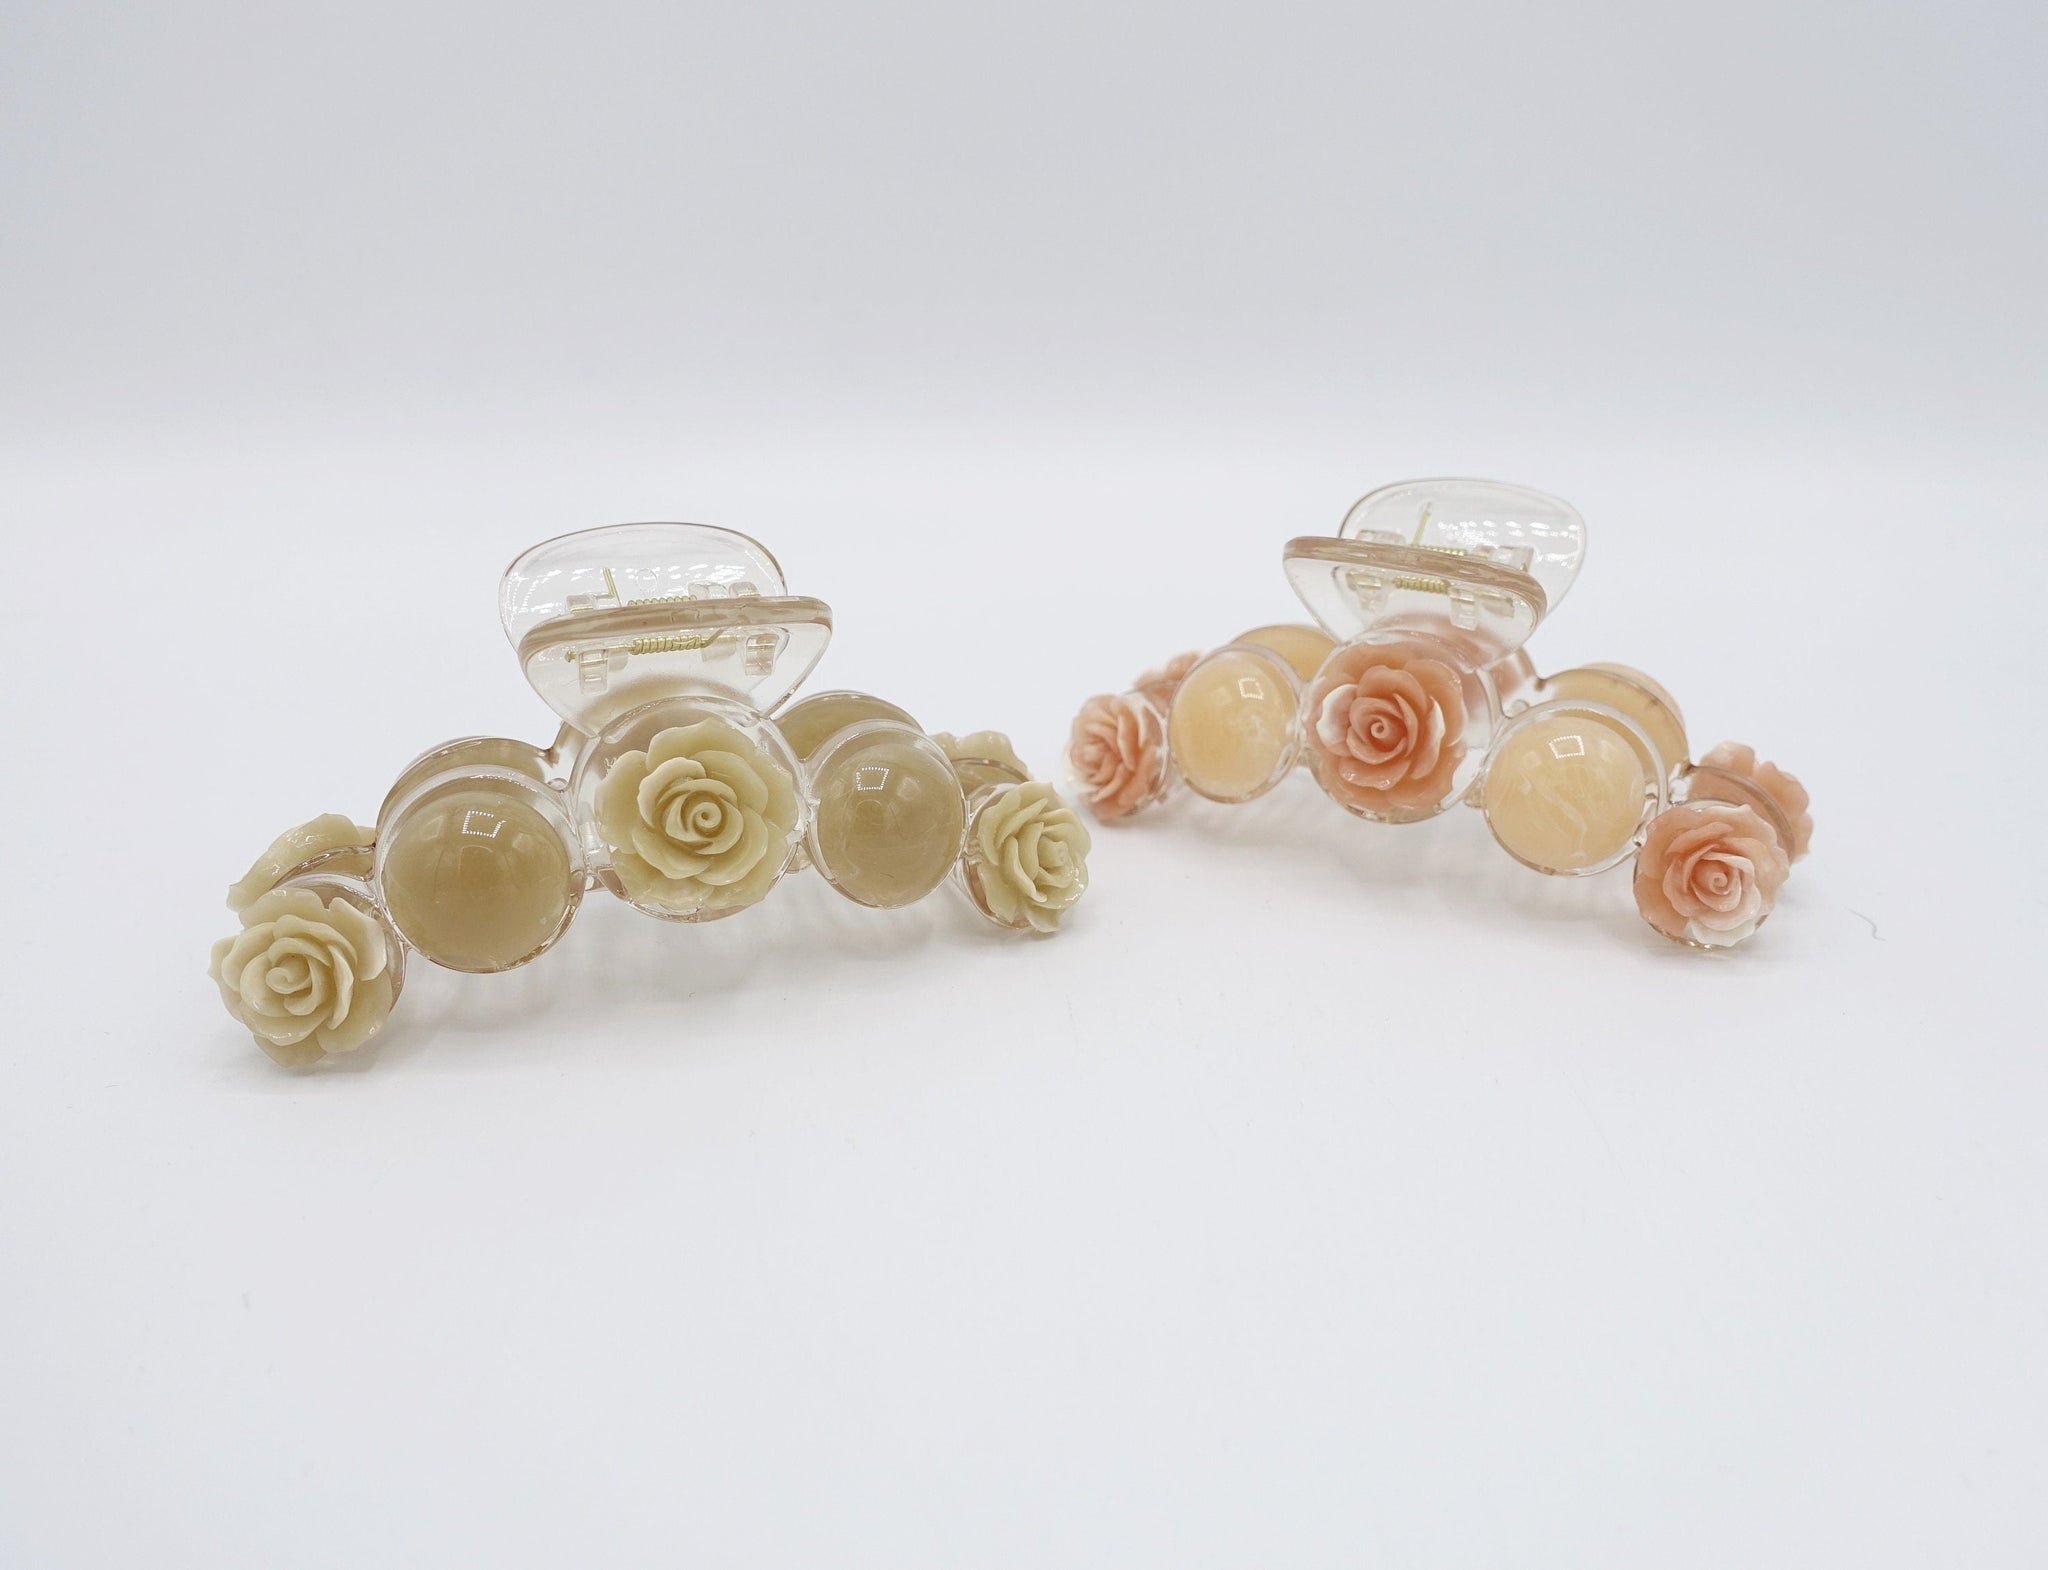 veryshine.com Hair Claw rose marble hair claw flower embellished hair clamp for women